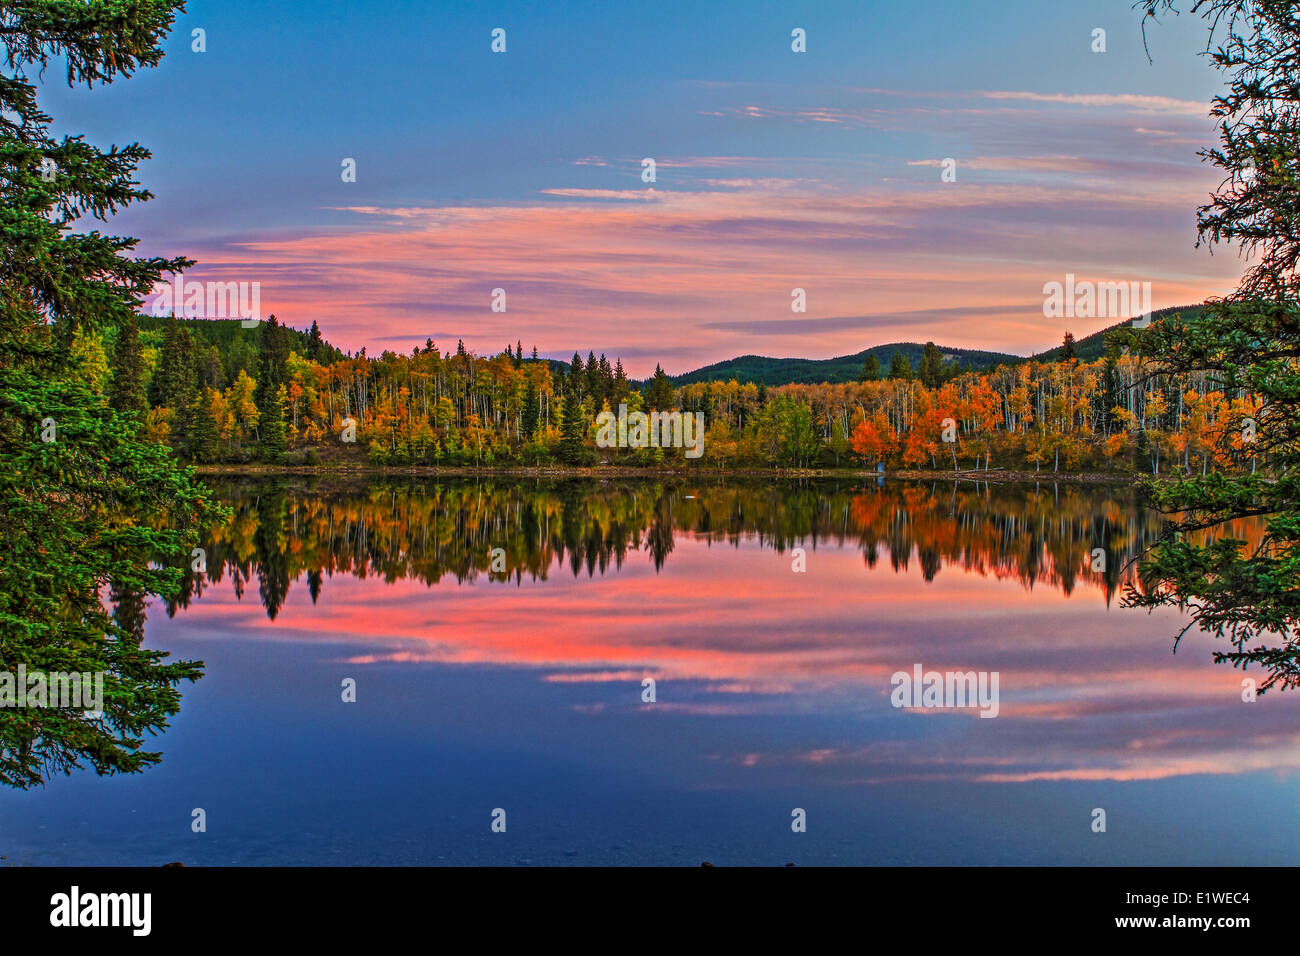 Sibbald Lake as seen in the fall at sunrise. Nice reflections of the sky and trees in the water. Stock Photo